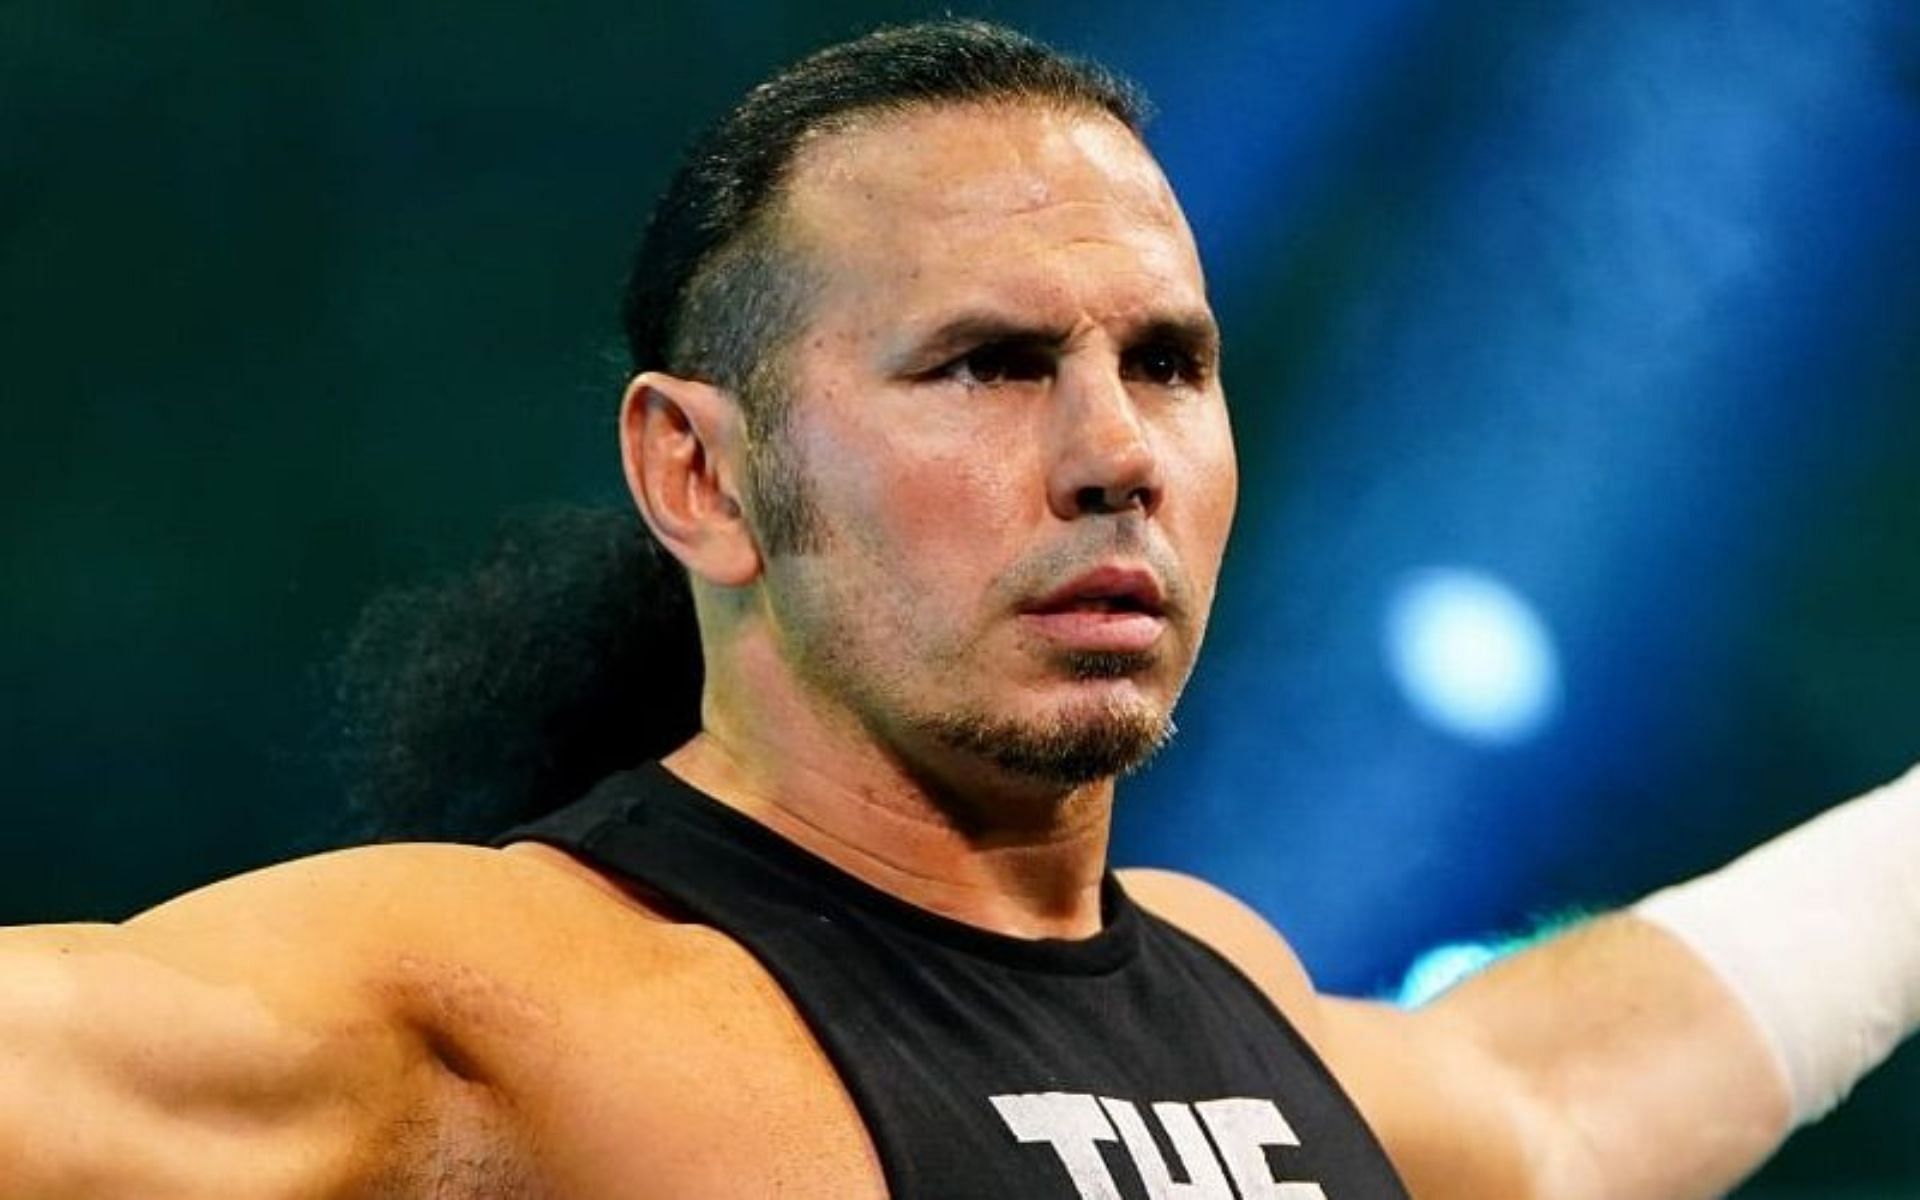 Matt Hardy currently competes on AEW